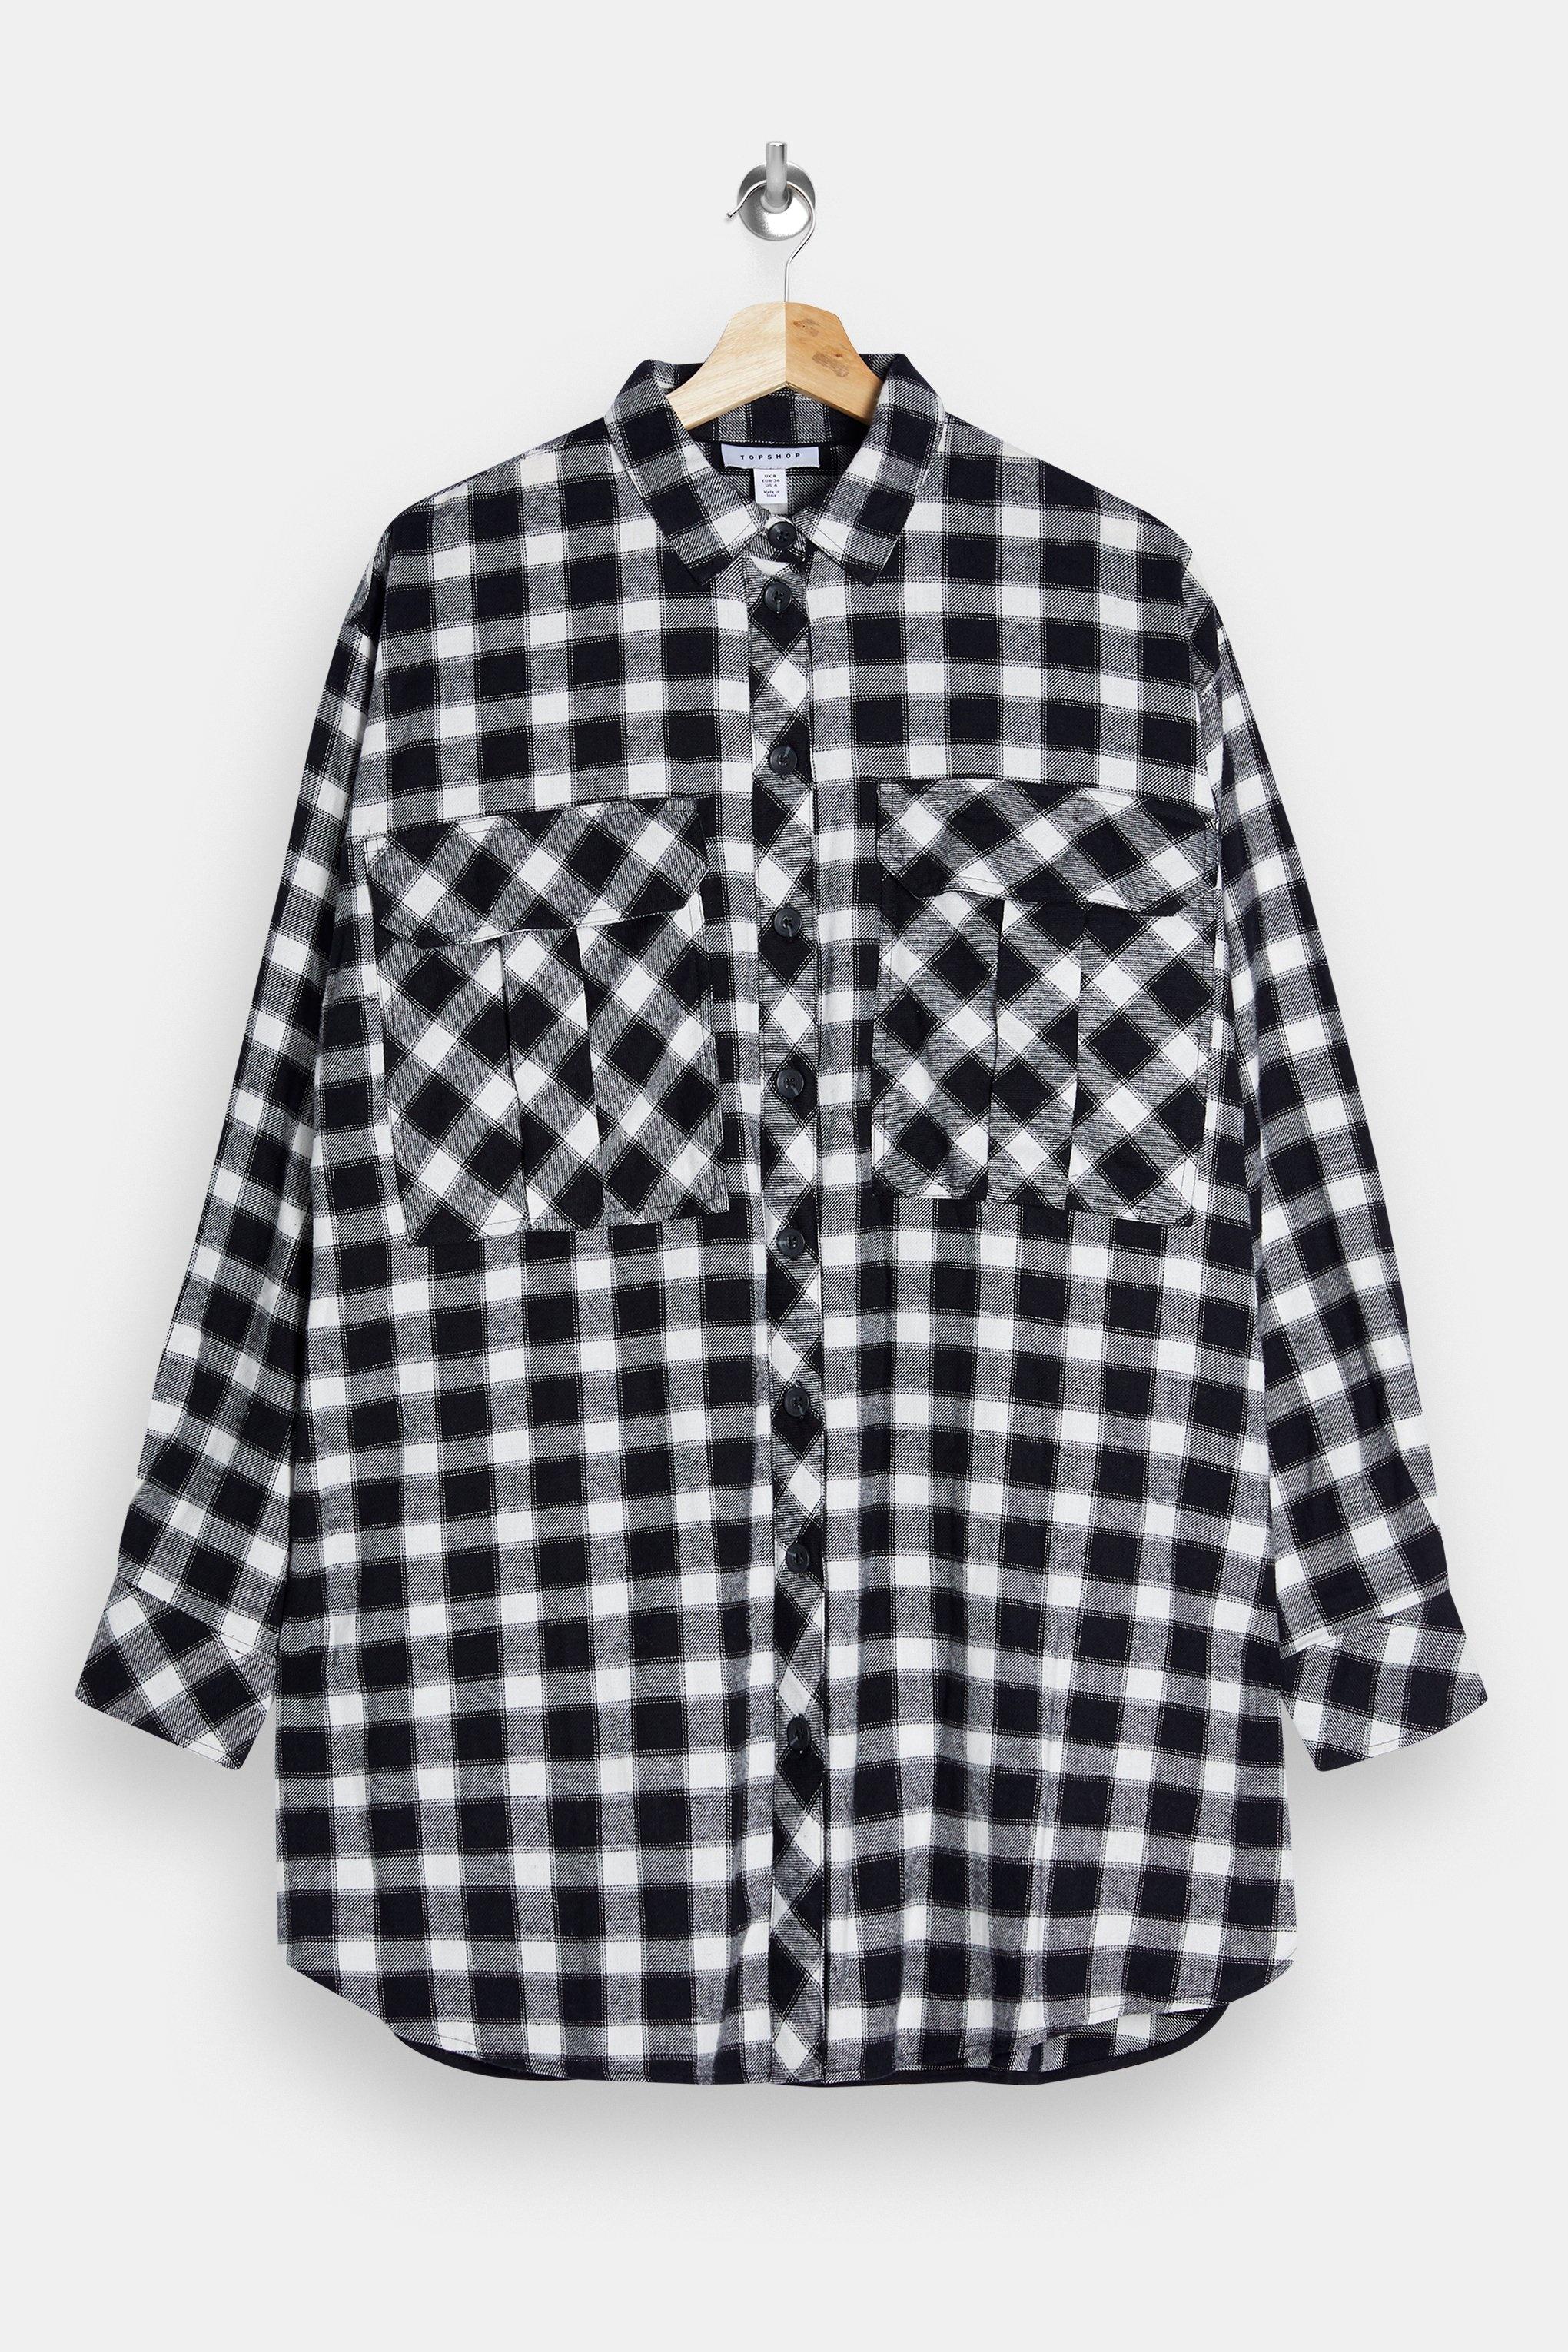 TOPSHOP Cotton Black And White Casual Oversized Check Shirt - Lyst